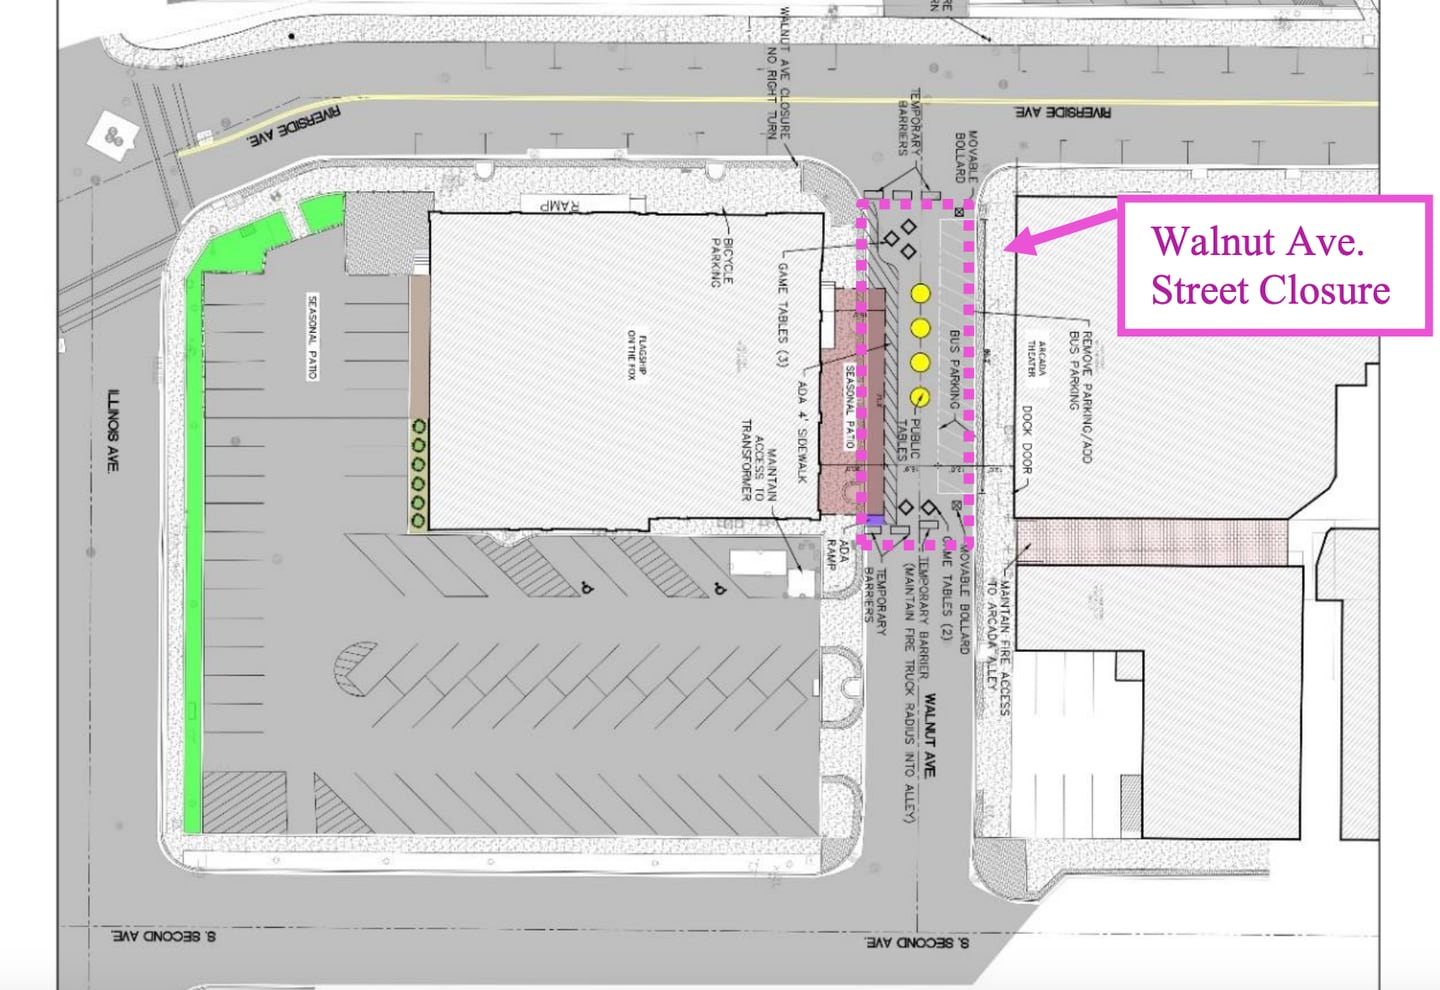 St. Charles City Council members are considering the temporary closure of Walnut Avenue from April 15 to Oct. 31 to create space for outdoor dining.